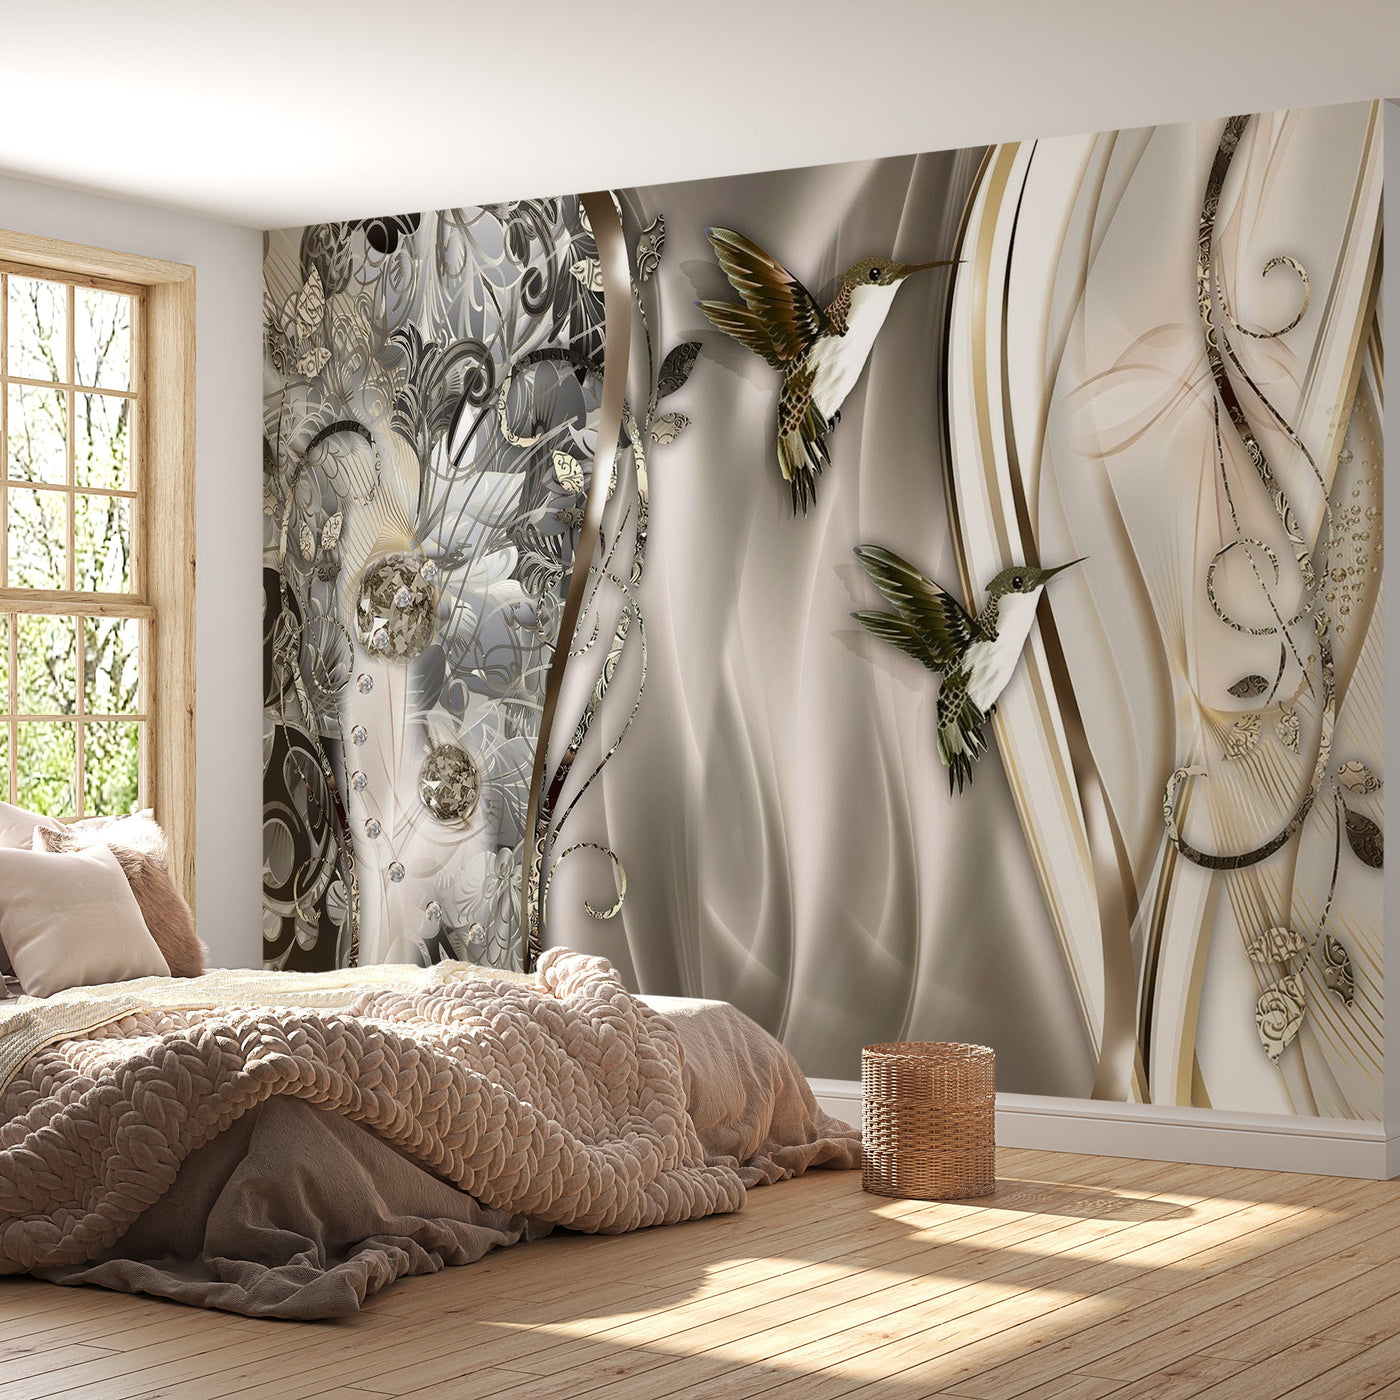 Peel & Stick Glam Wall Mural - Hummingbirds On The Wave Brown - Removable Wall Decals